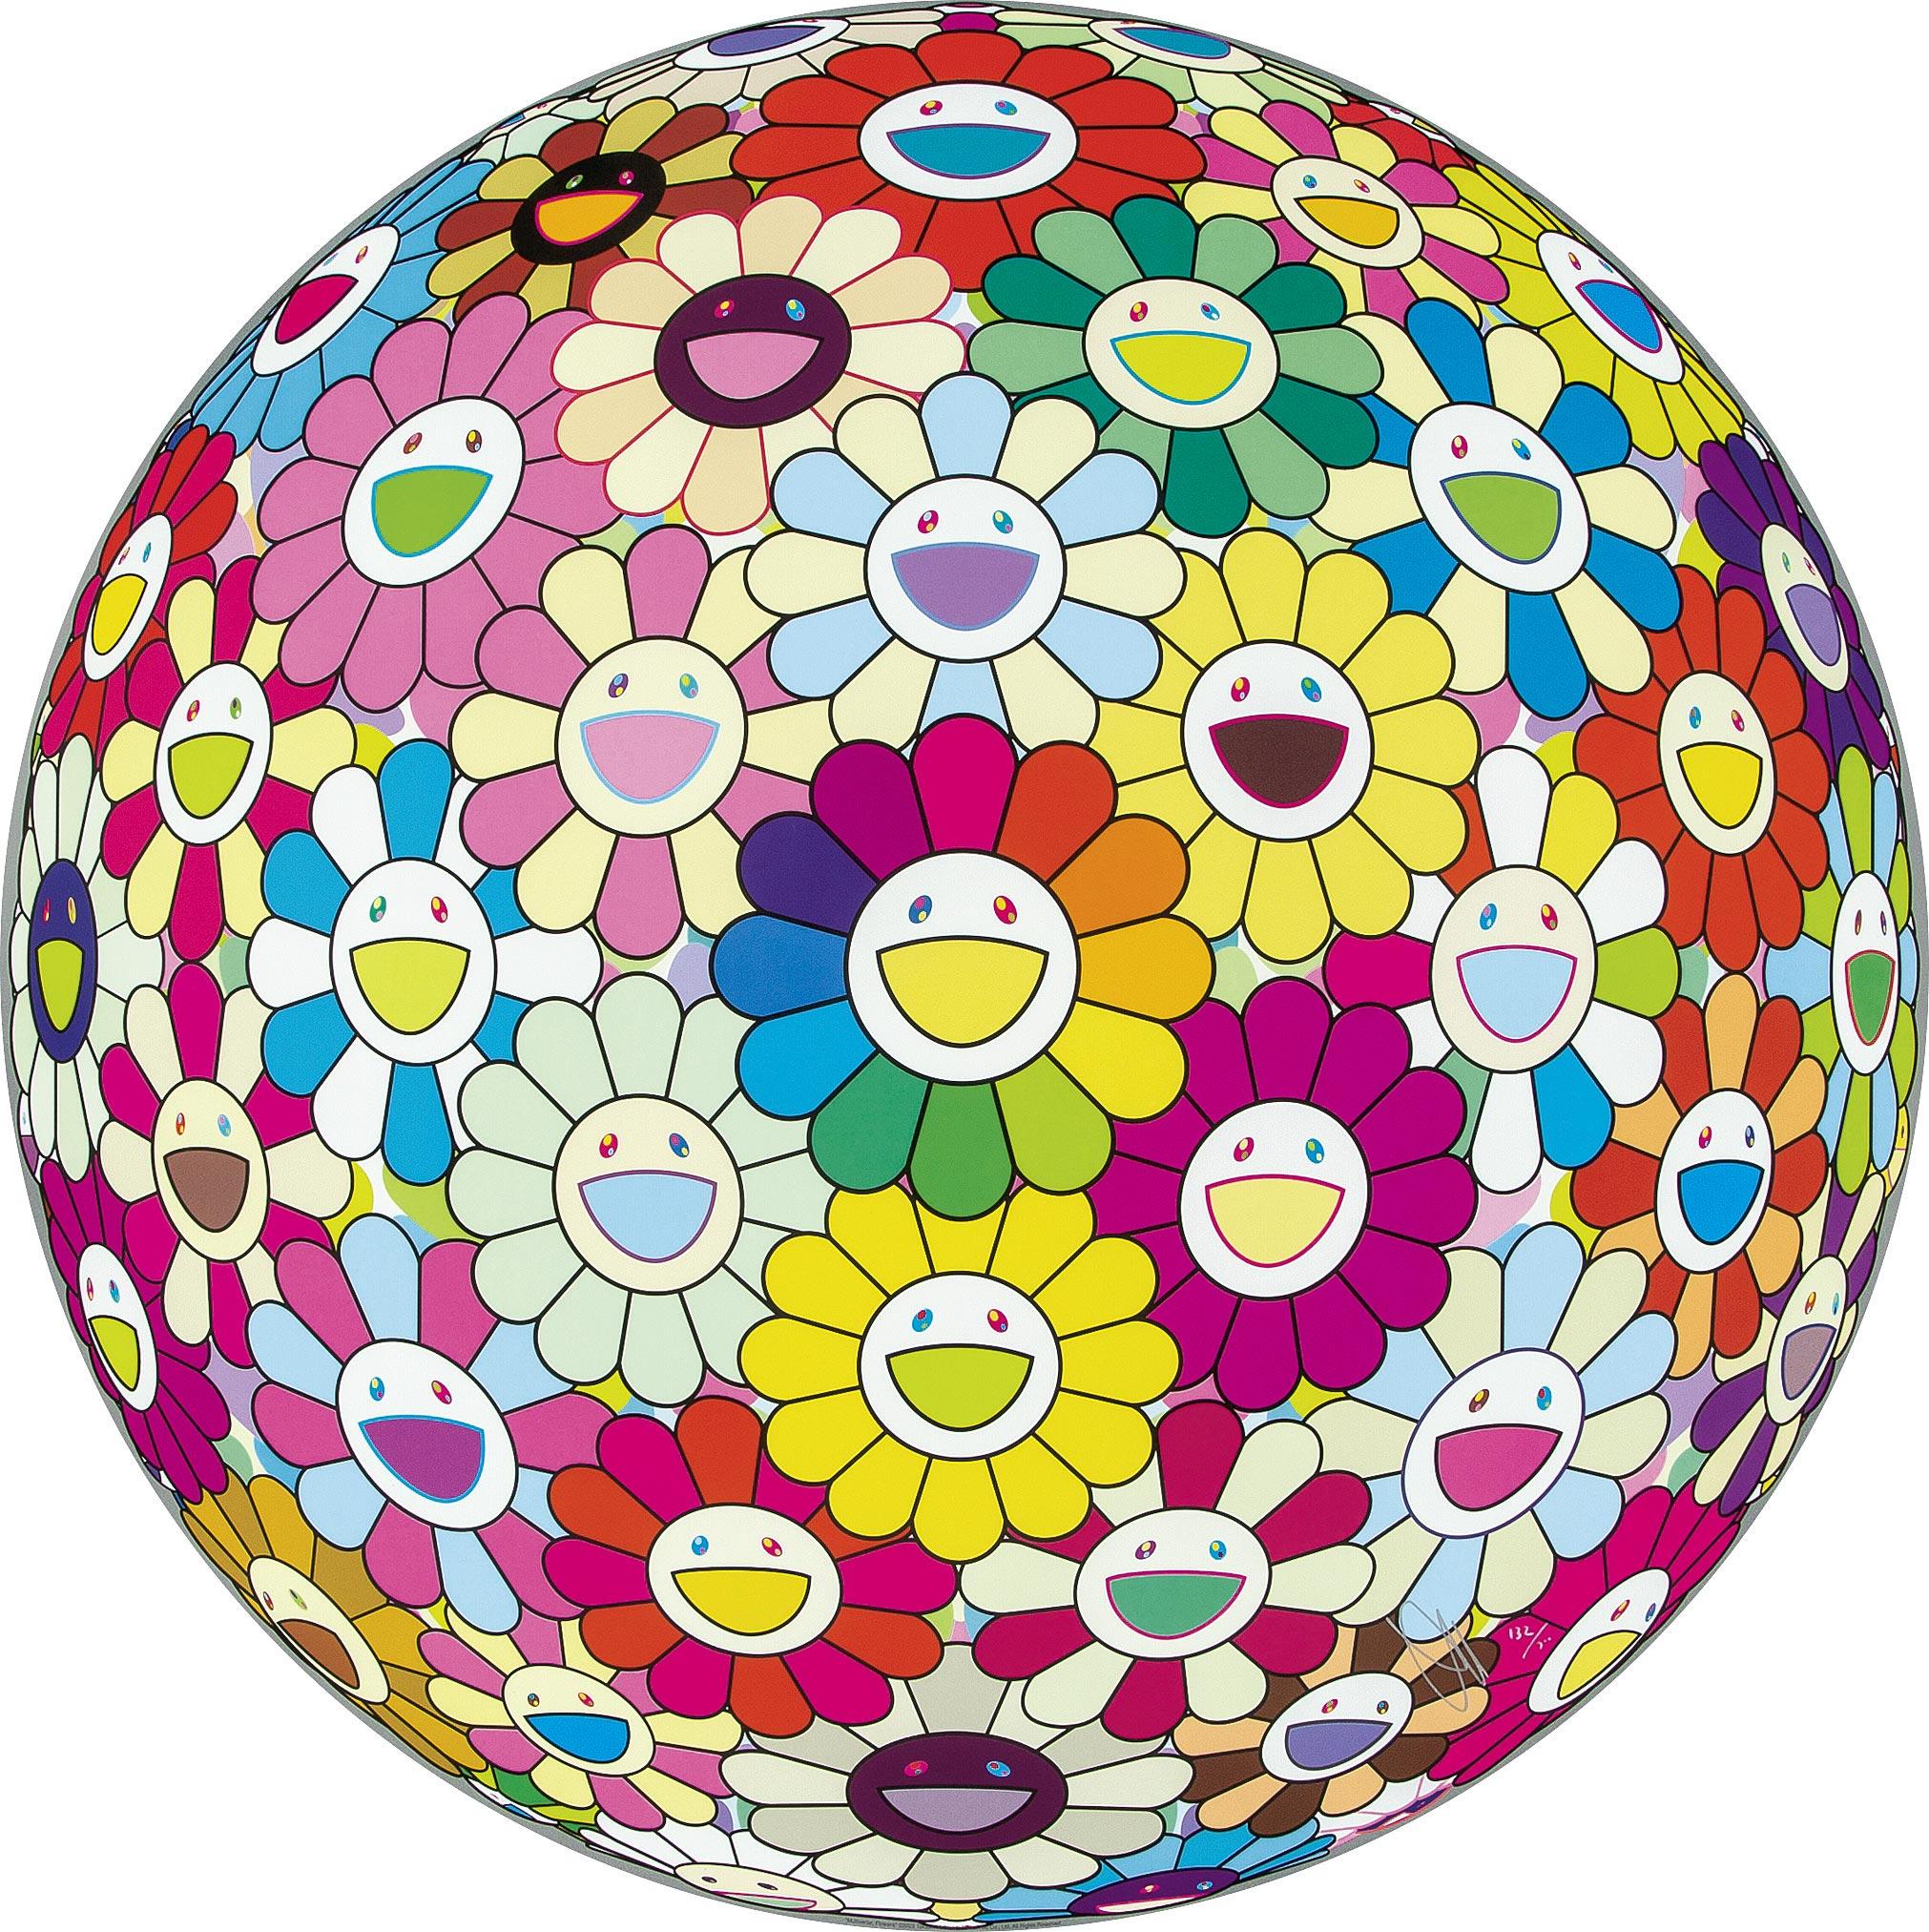 Takashi Murakami Figurative Print - Multiverse, Flowers. Limited Edition (print) by Murakami signed and numbered.